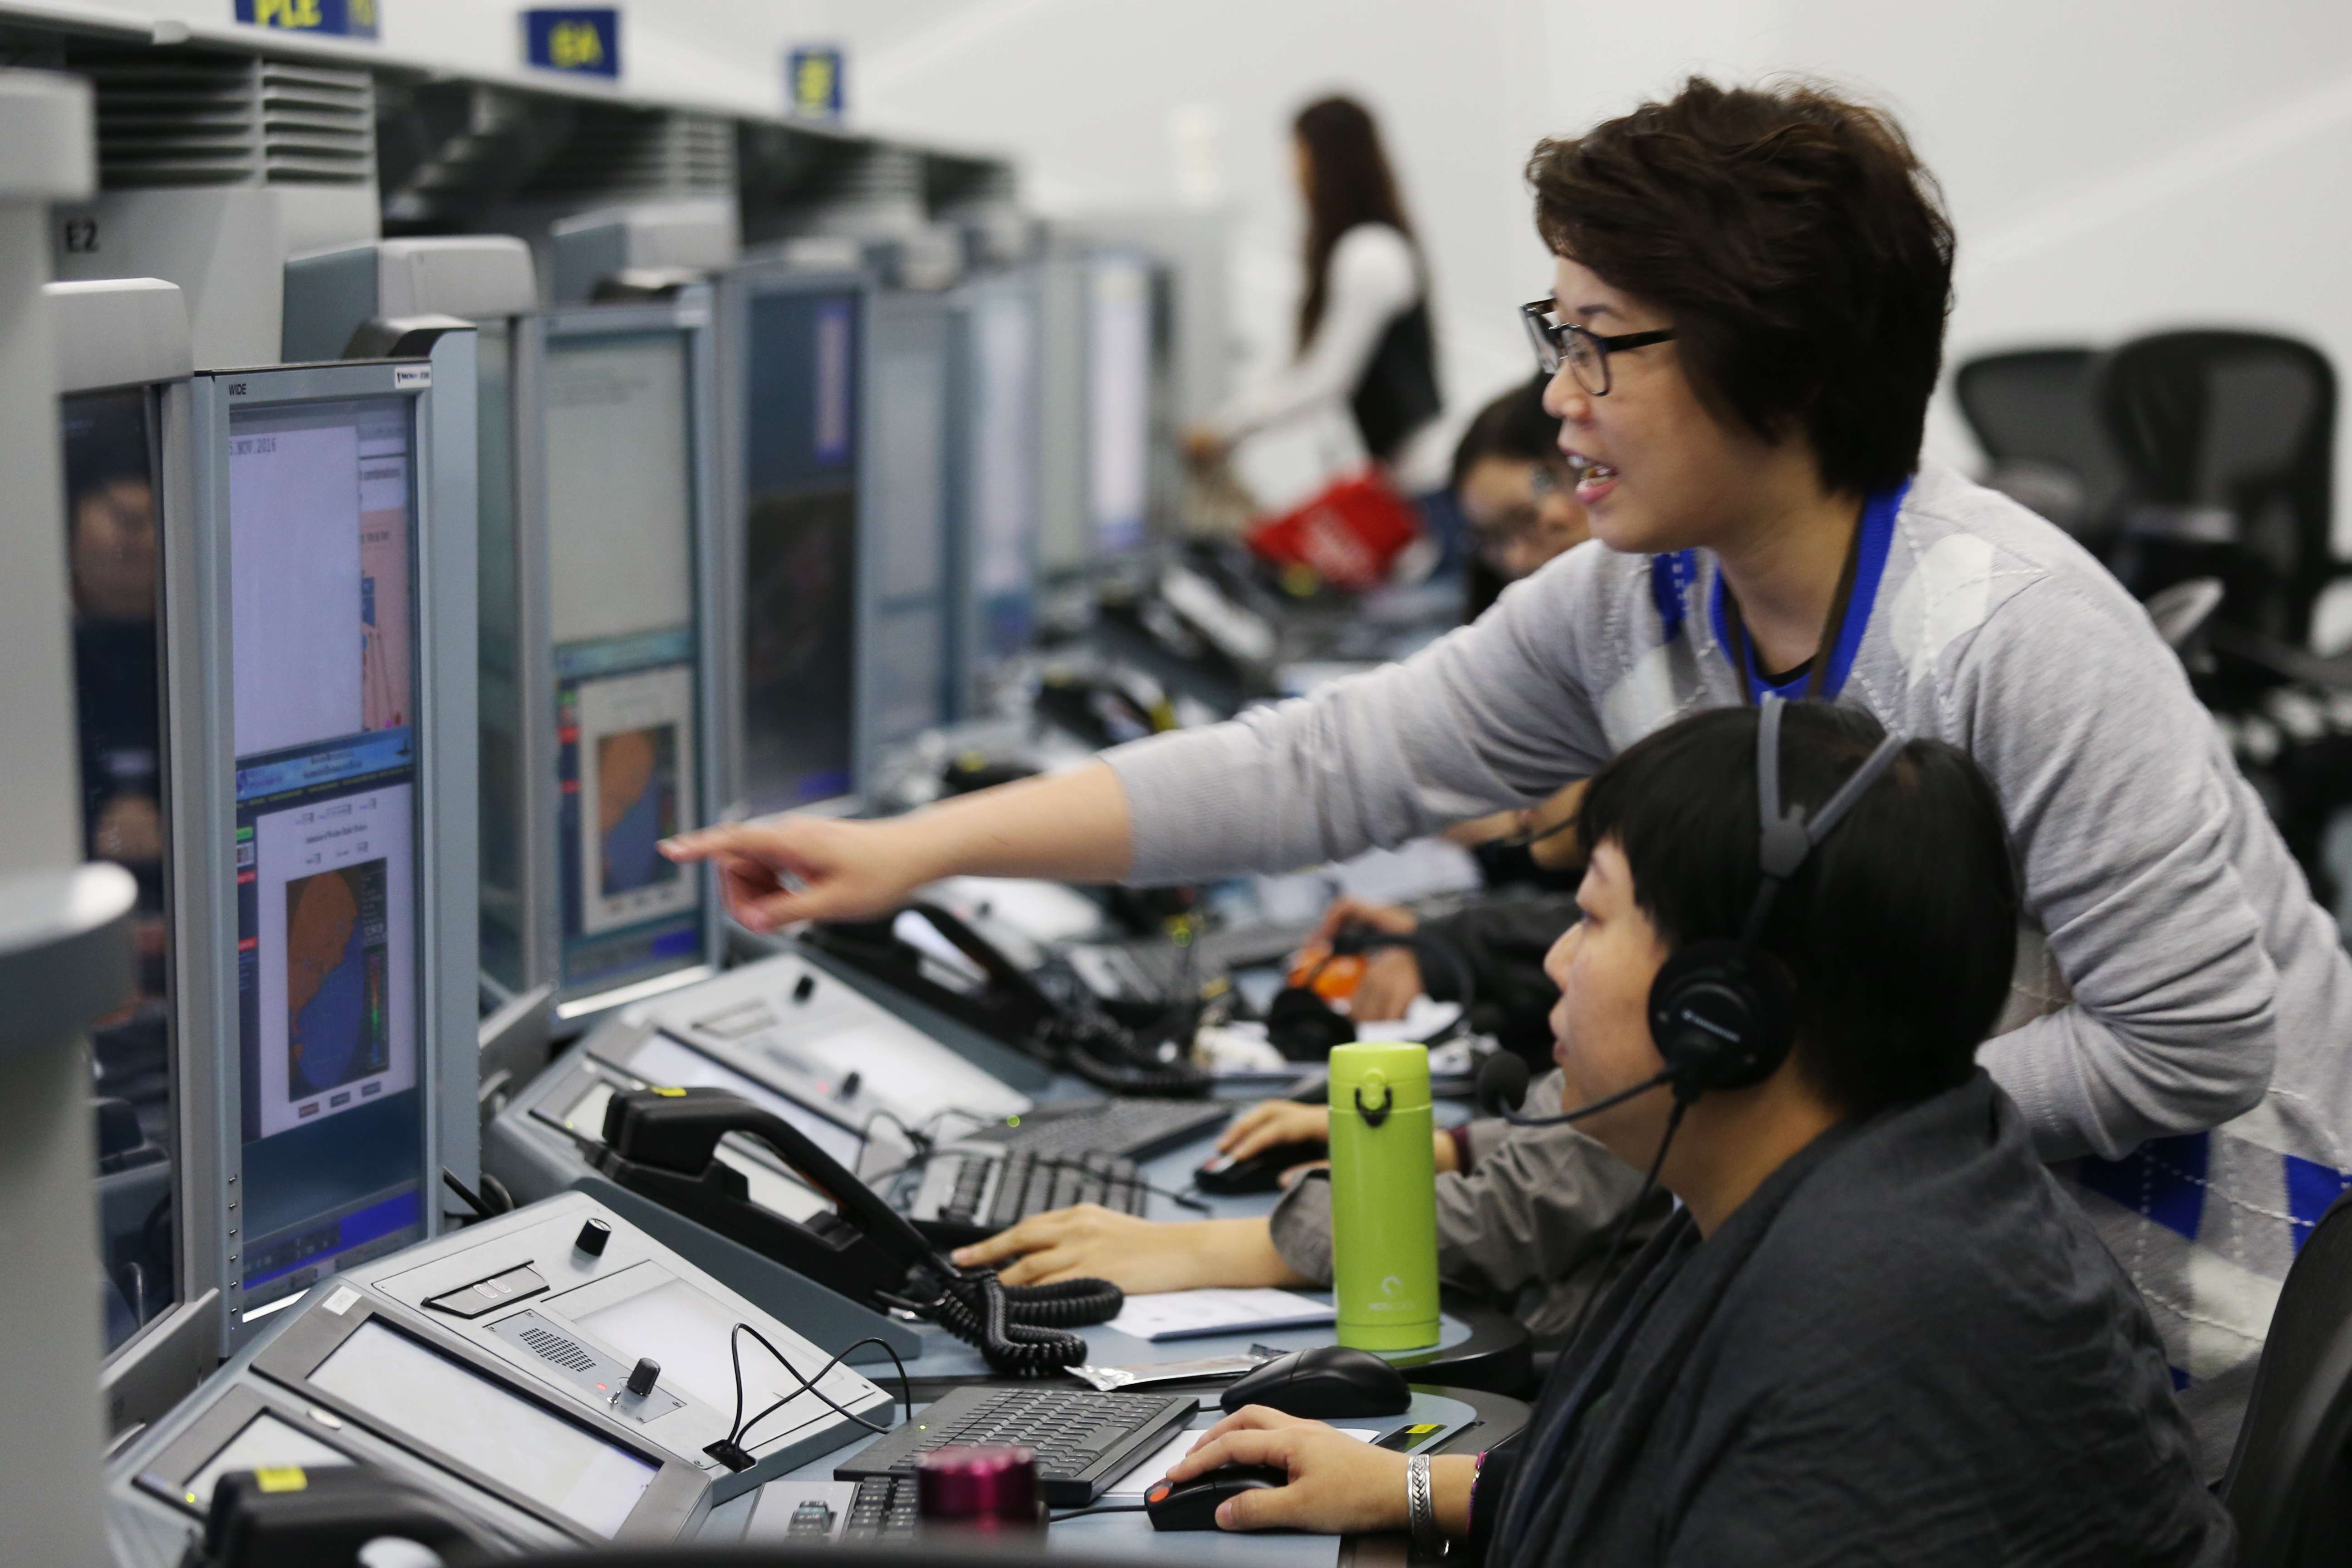 Air traffic controllers using the new system. Photo: Dickson Lee